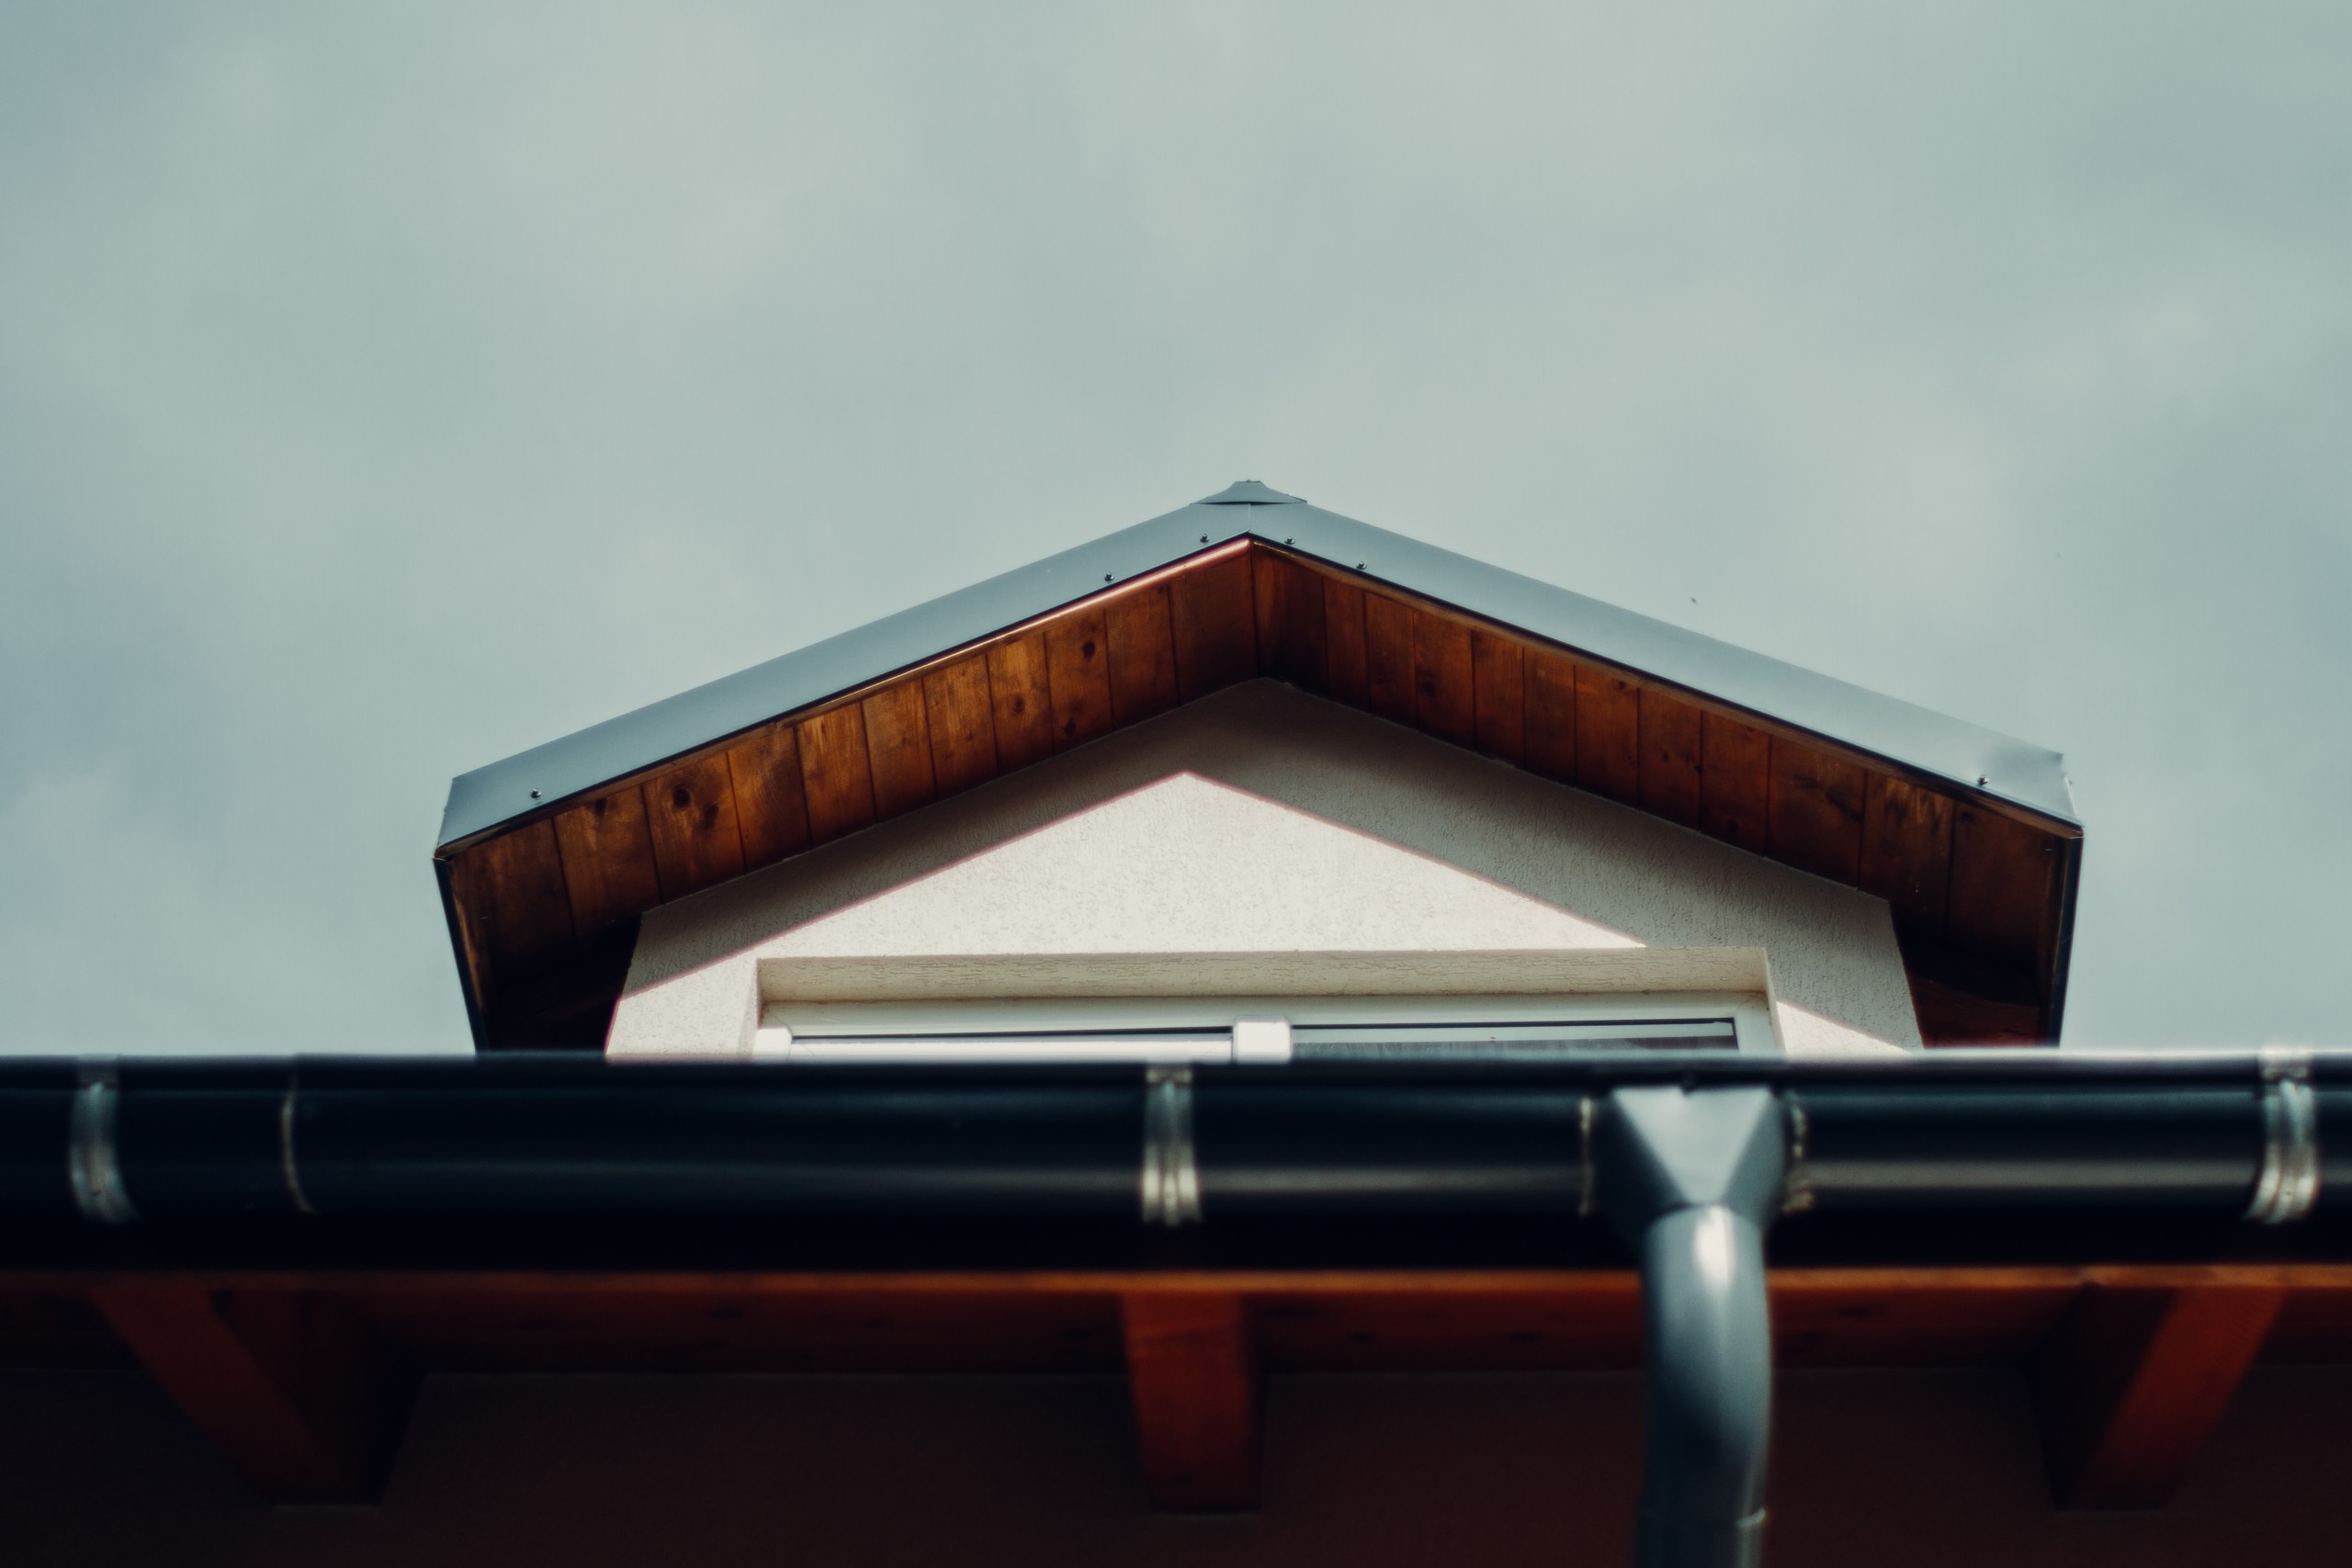 After extended months of inclement weather exposure, homeowners should check their roofing and gutters for any potential defects.